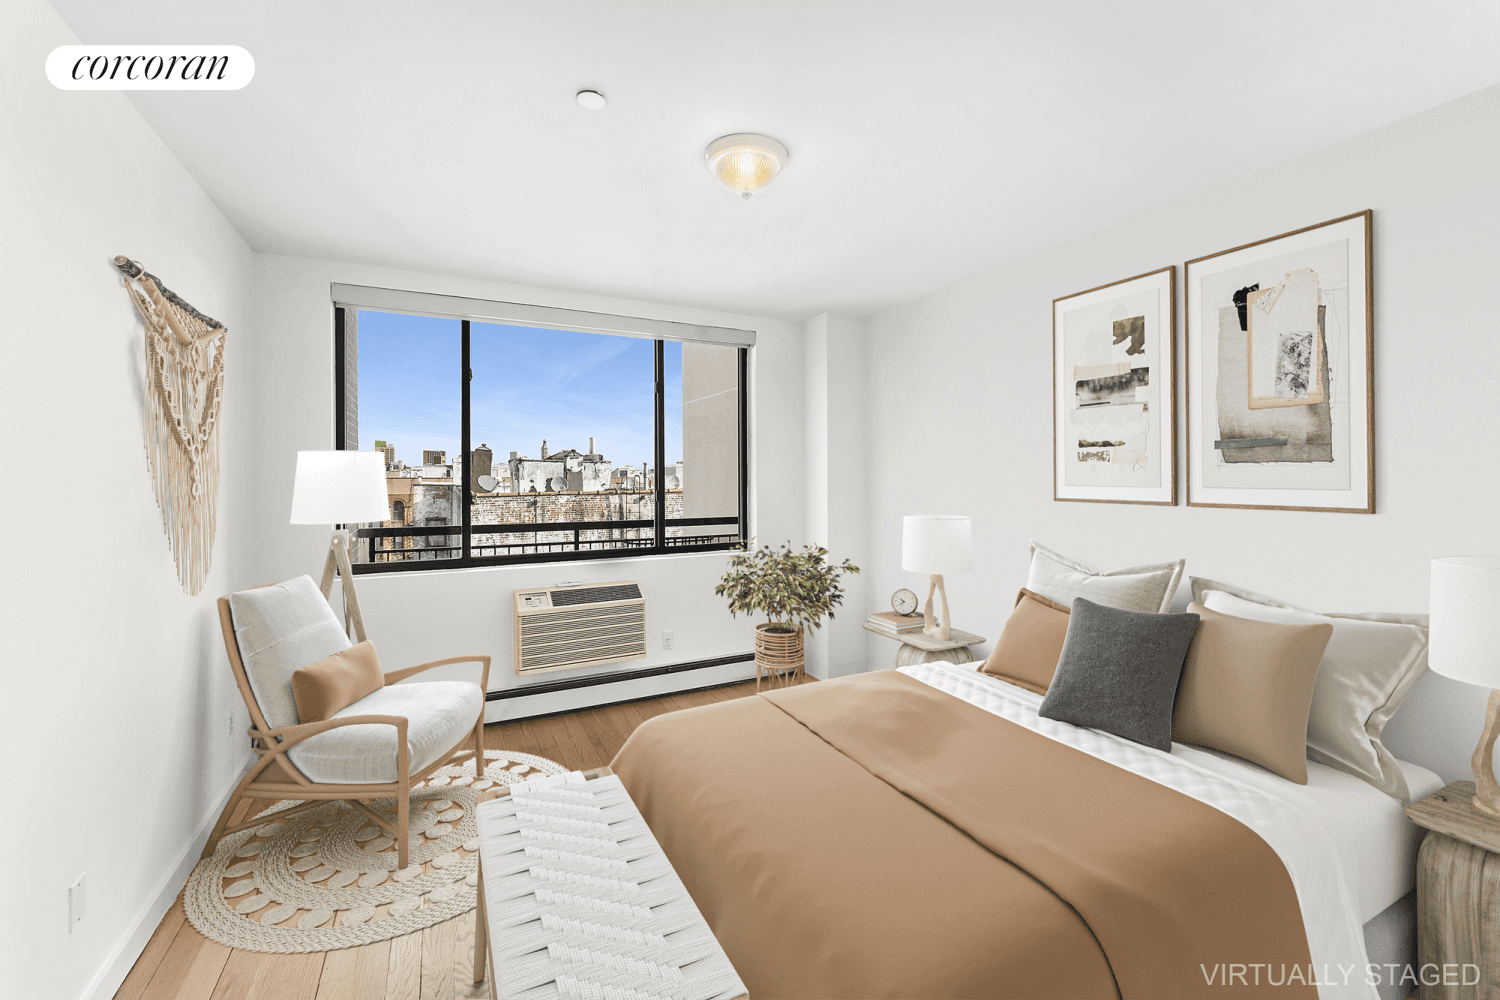 Welcome to apartment 5 at the Morris Park Condominium at 467 West 163rd Street !